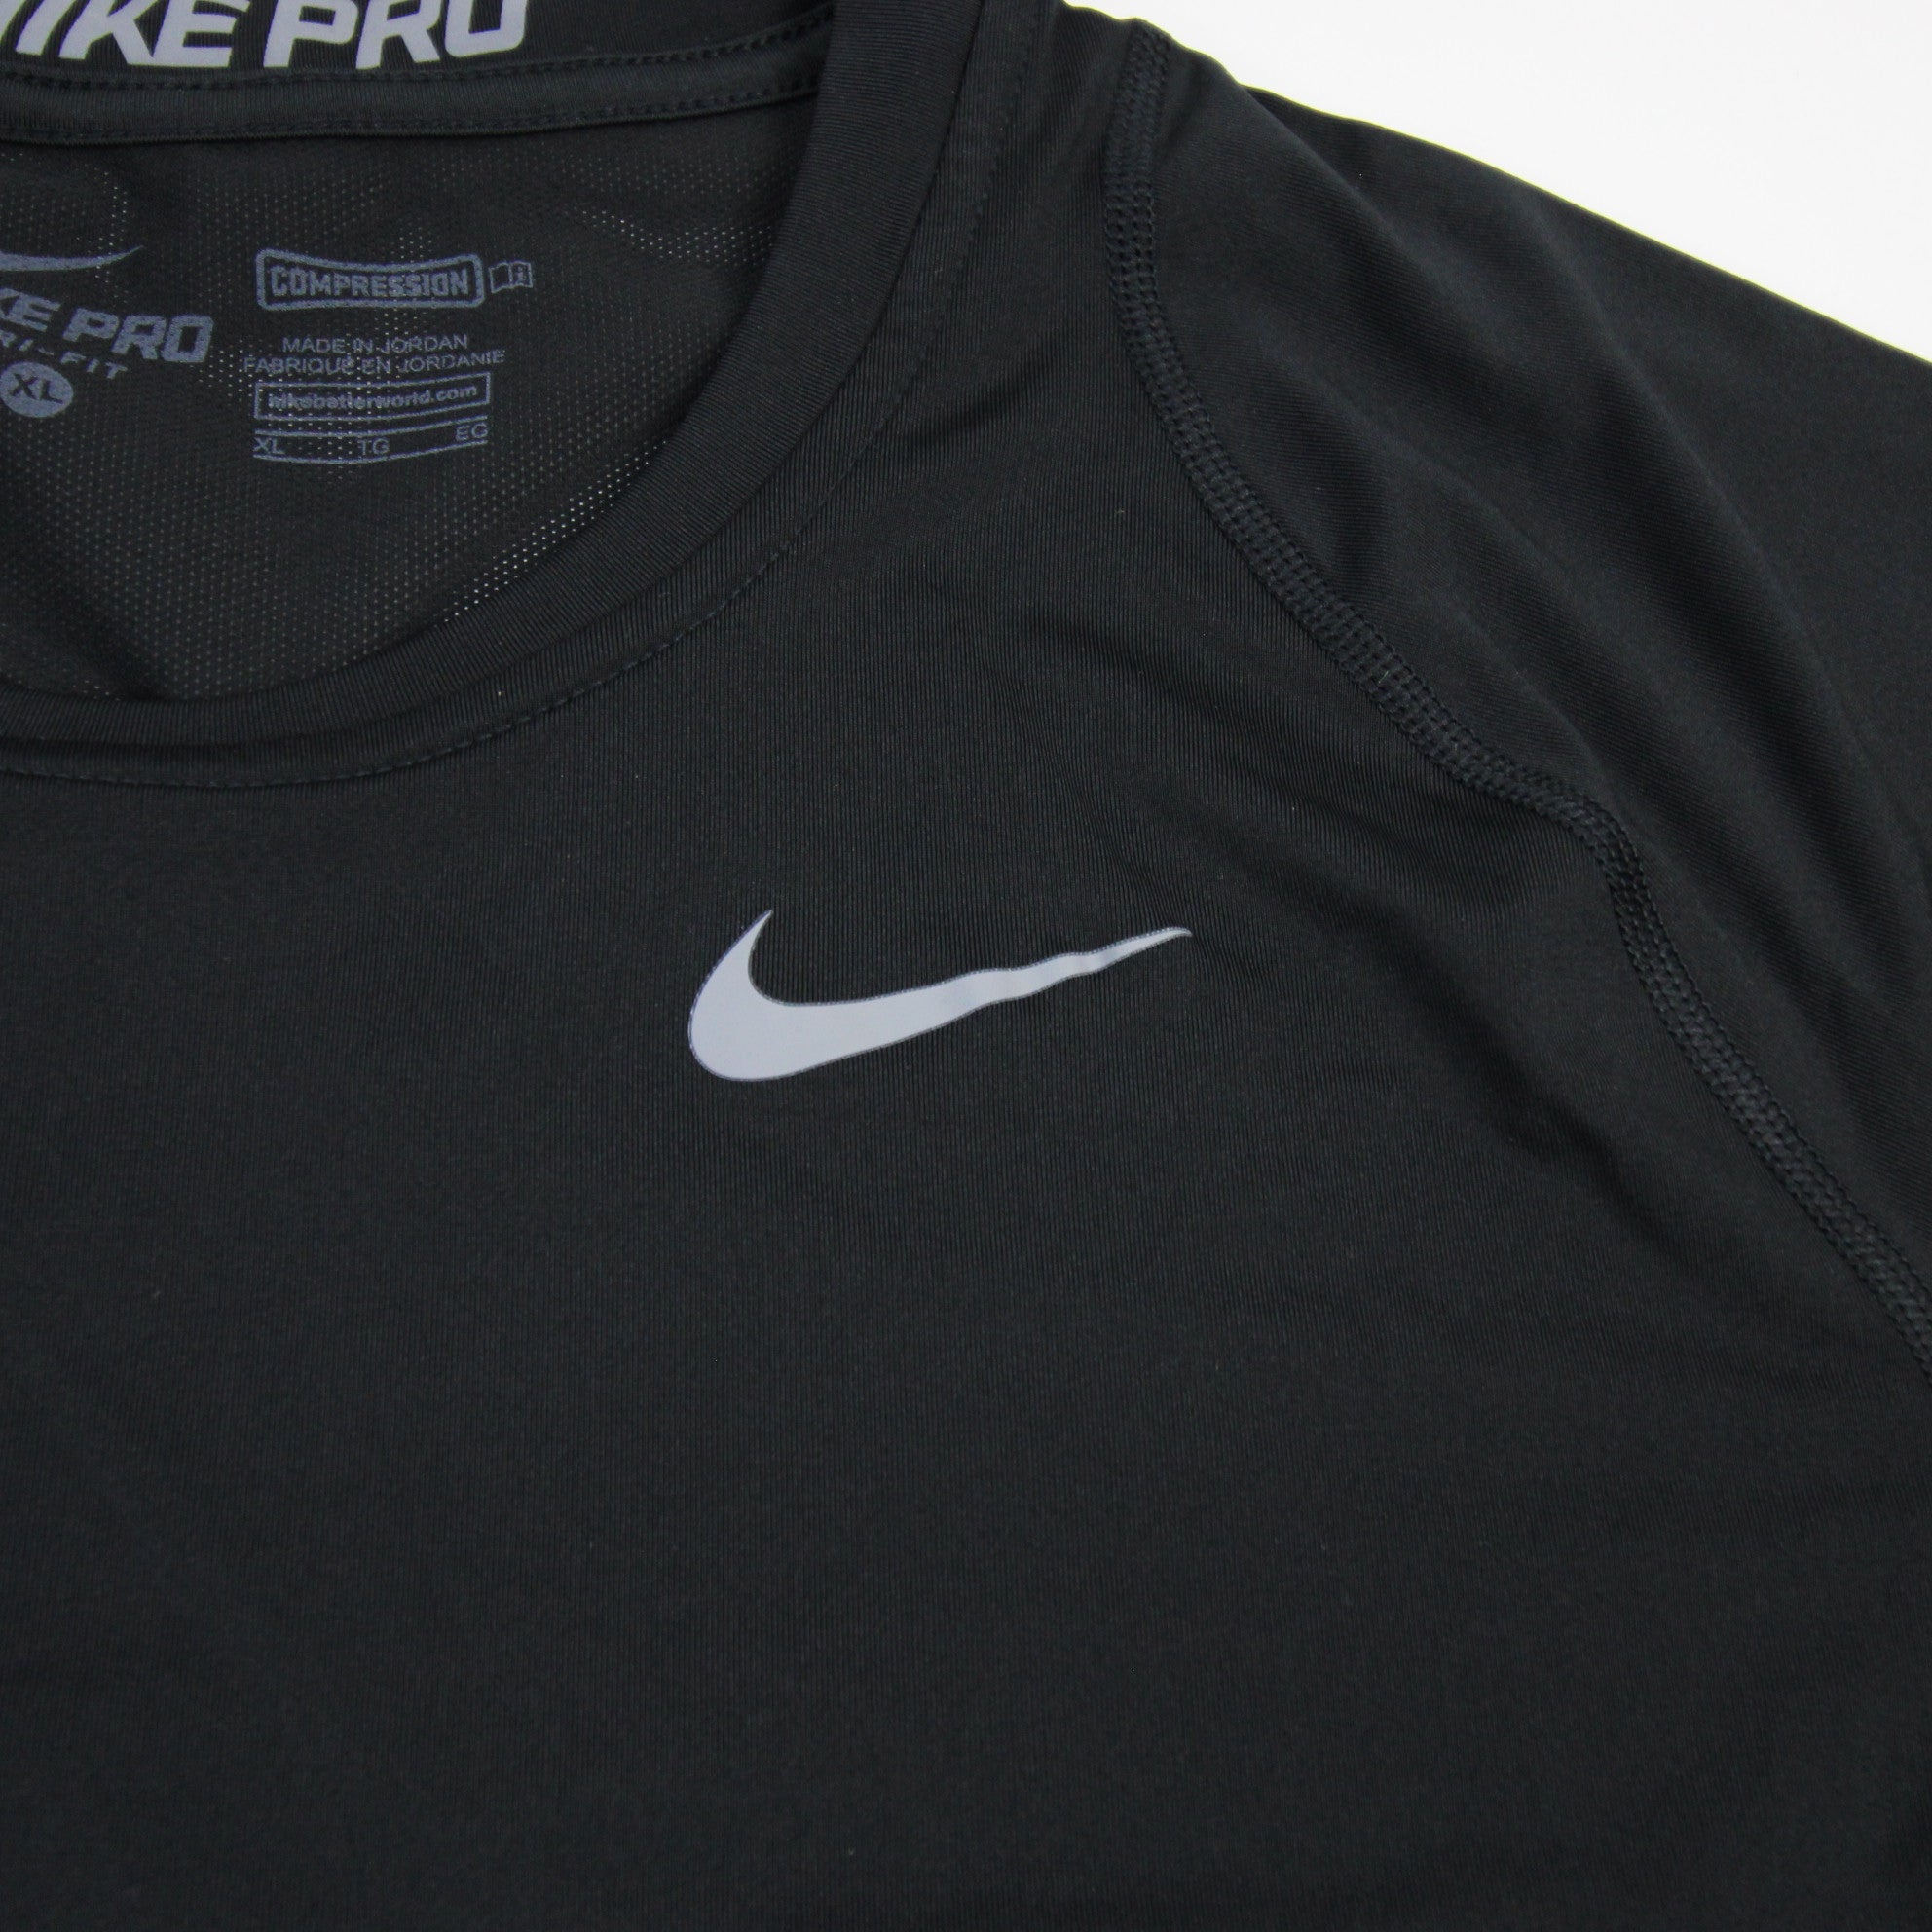 Nike Pro Dri-Fit Compression Top Men's Black New with Tags XL